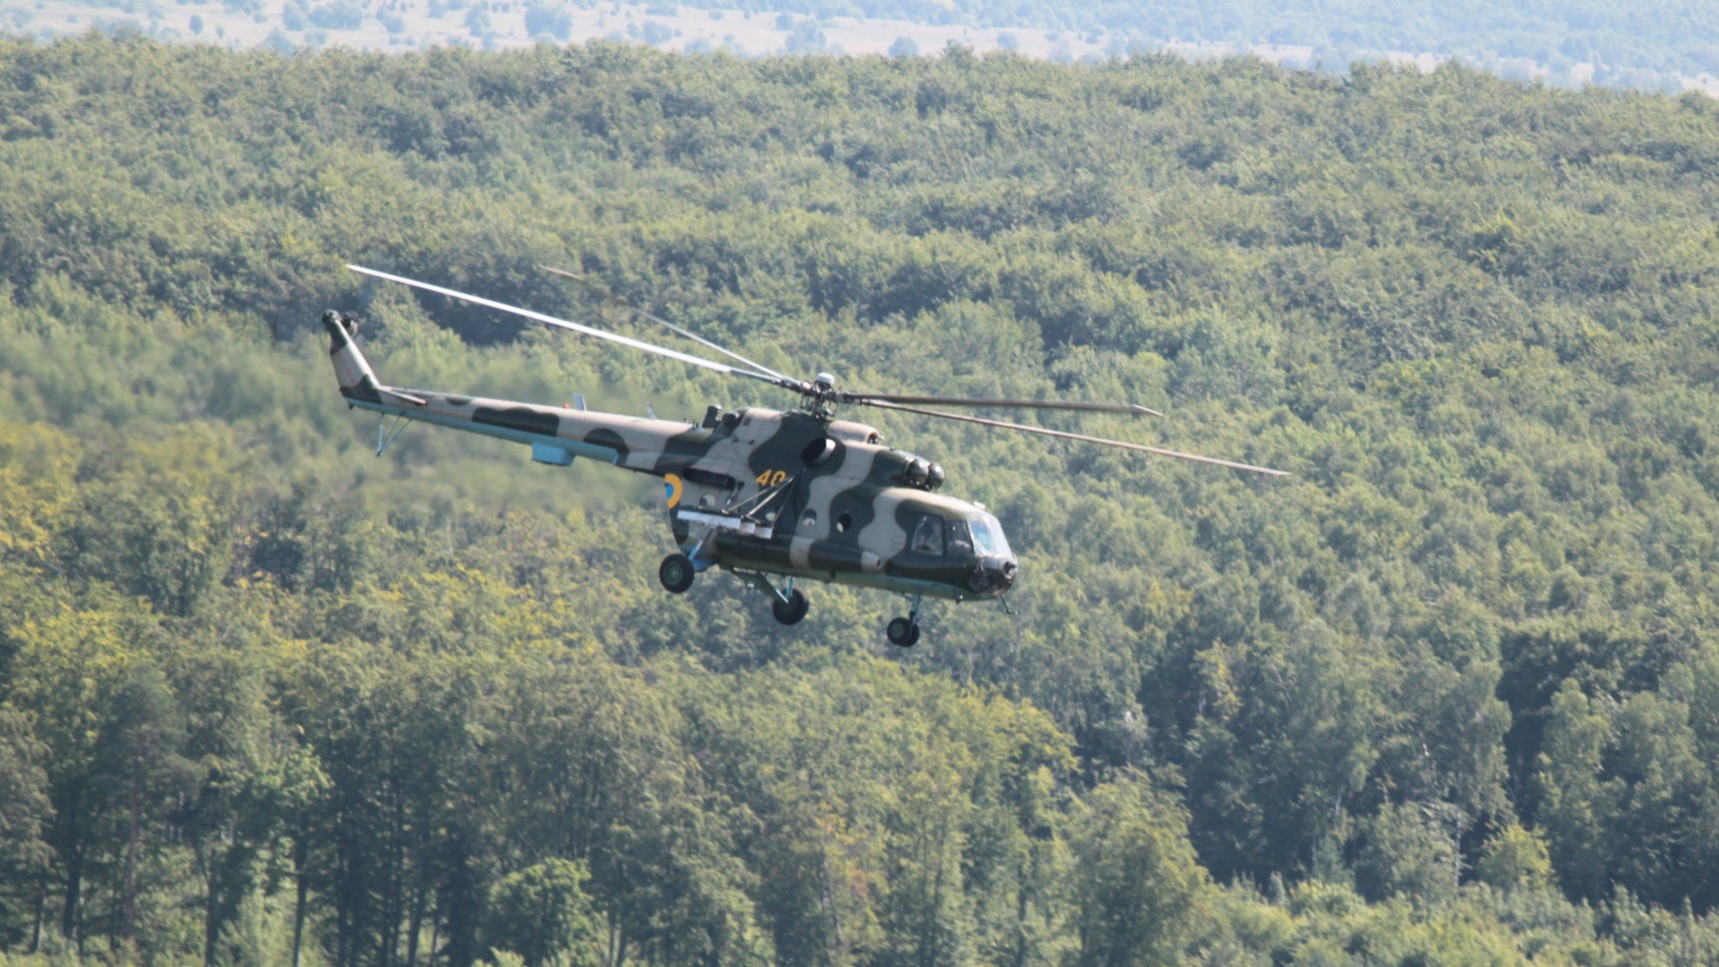 MI-8 / Archivbild / by U.S. Army Europe is marked with Public Domain Mark 1.0. (cropped) https://creativecommons.org/publicdomain/zero/1.0/